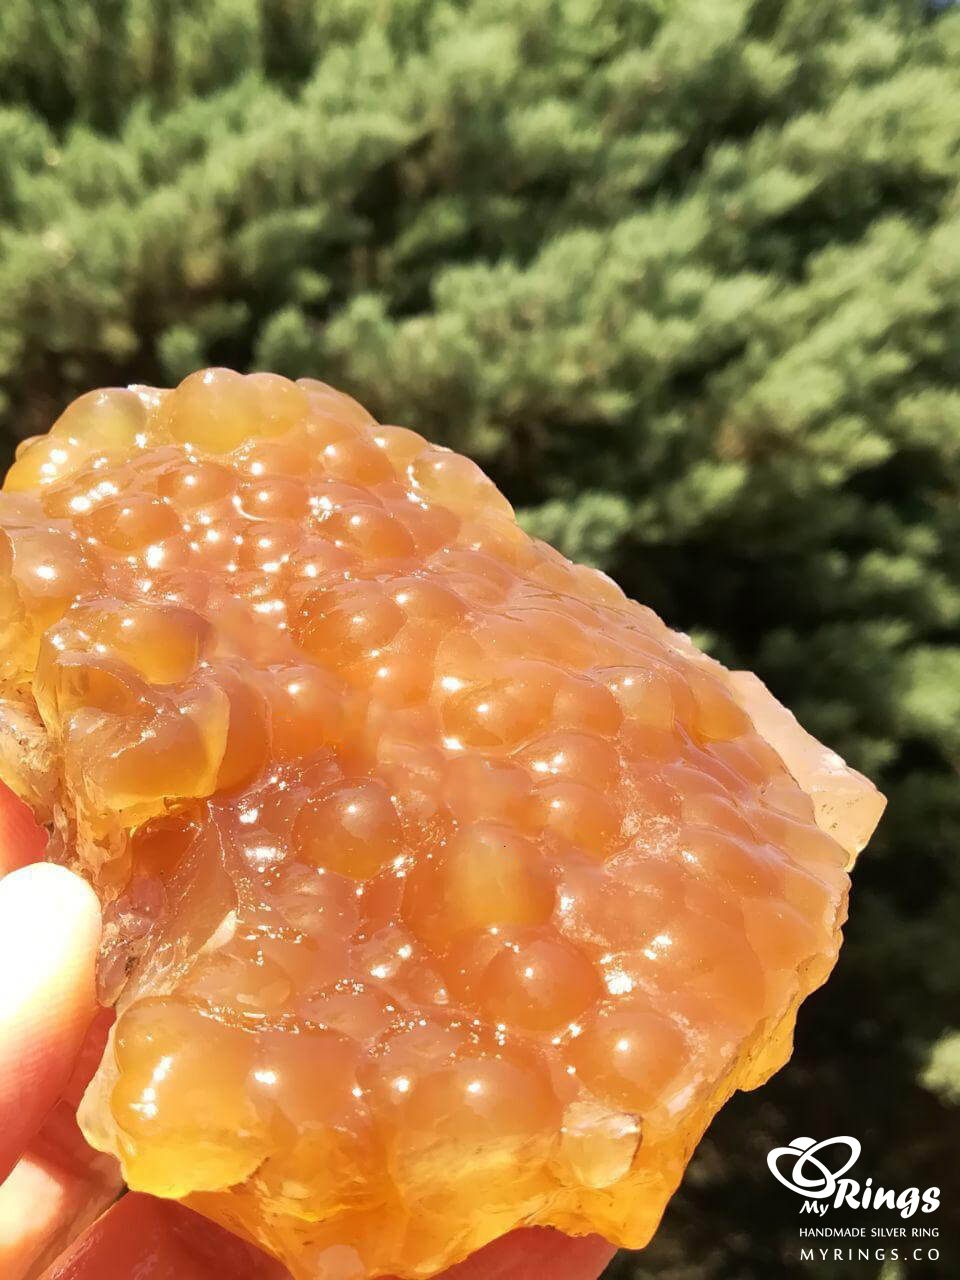 Some questions on the subject of Yemeni agate